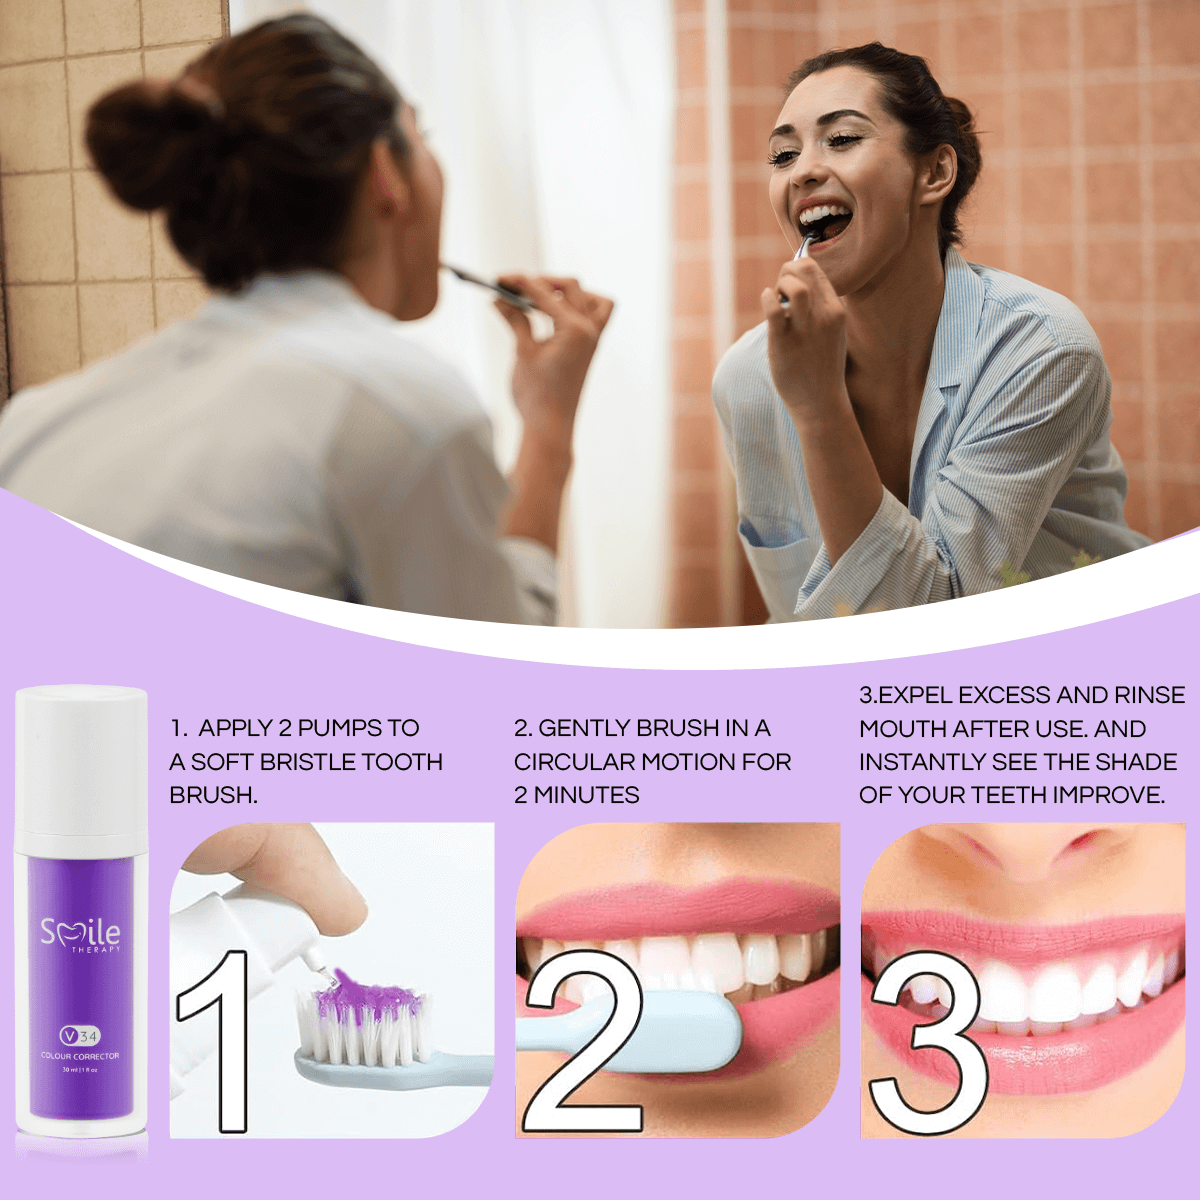 V34 Colour Corrector | Purple Teeth Whitening Toothpaste | Advanced Stain Removal - Smile Therapy